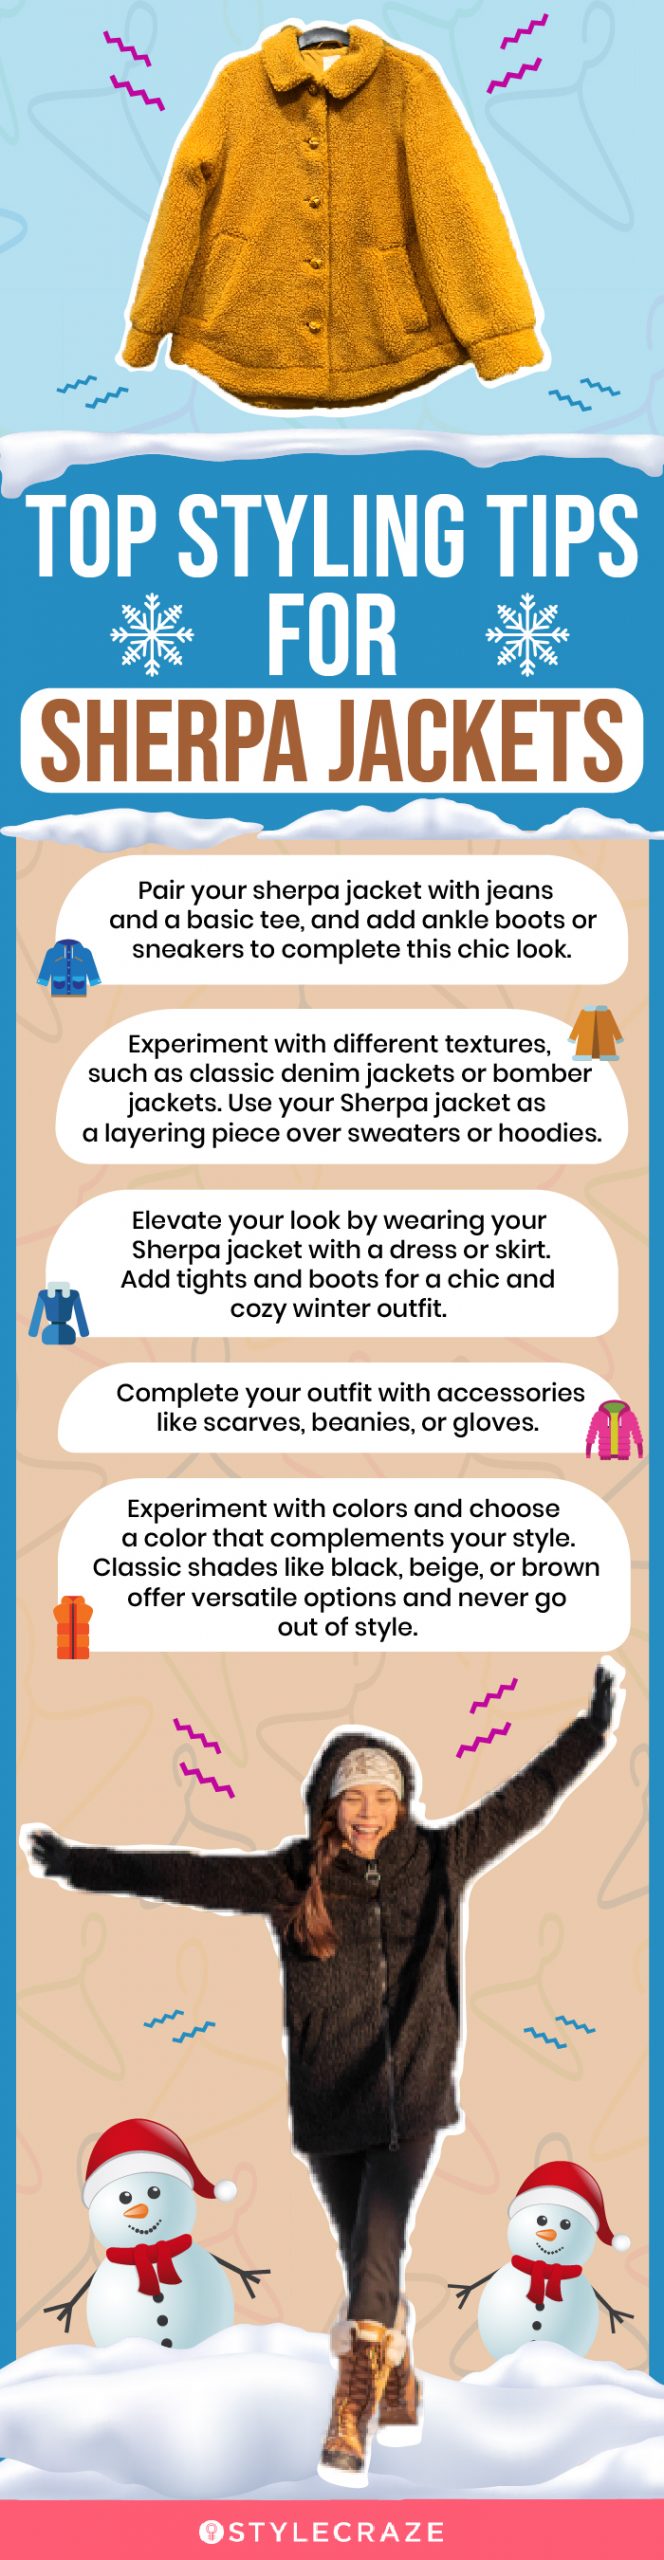 Top Styling Tips For Sherpa Jackets (infographic)